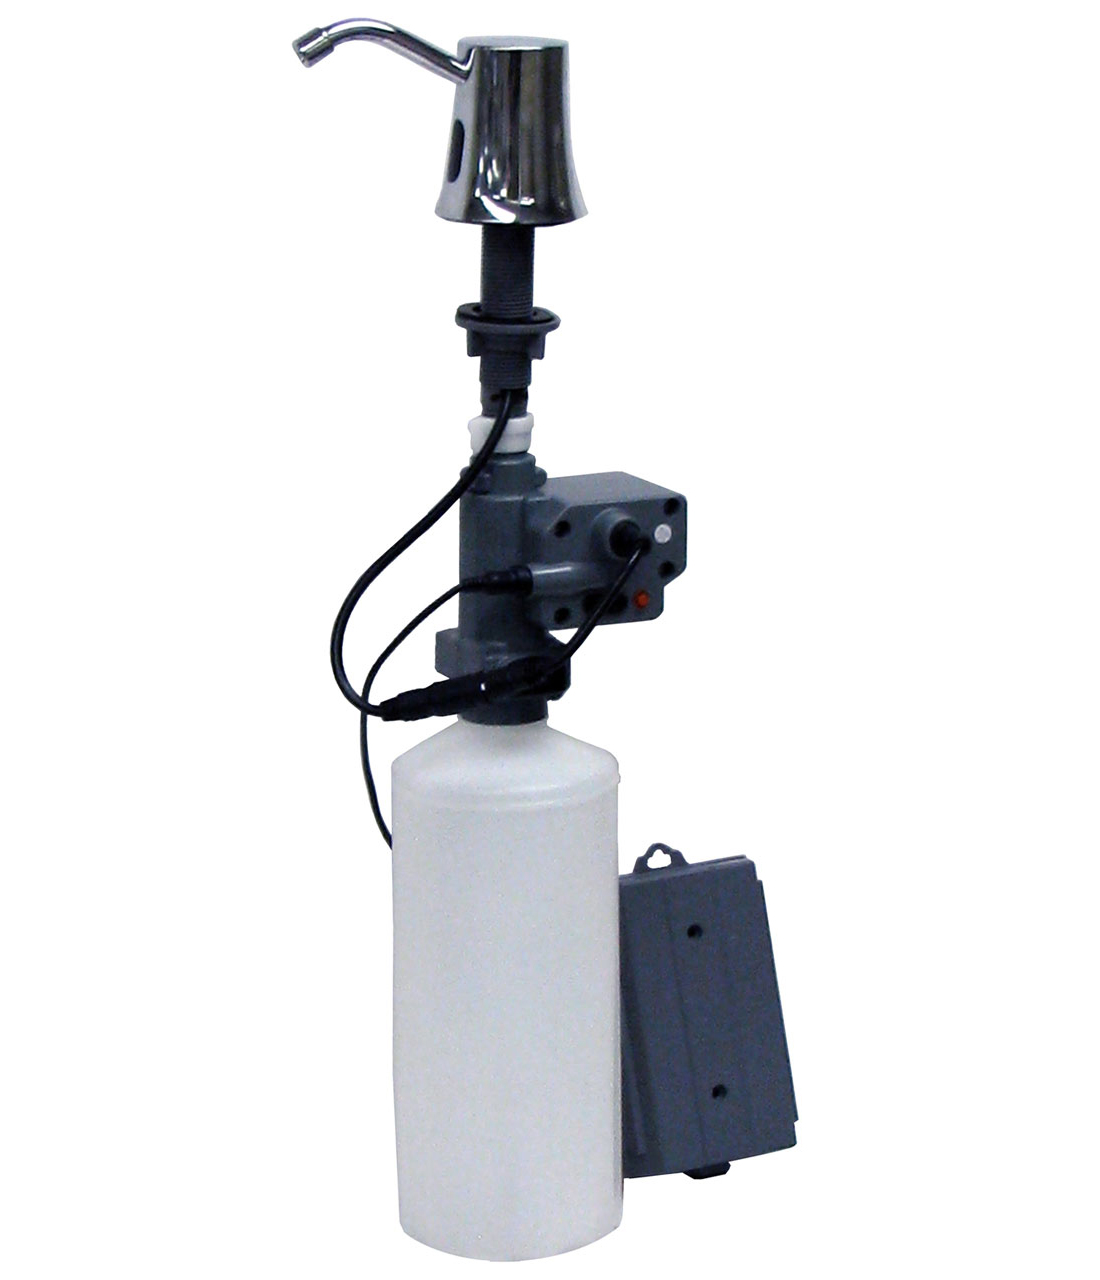 Automatic Basin-Mounted Soap Dispenser - (Model #: g-63sd)-image